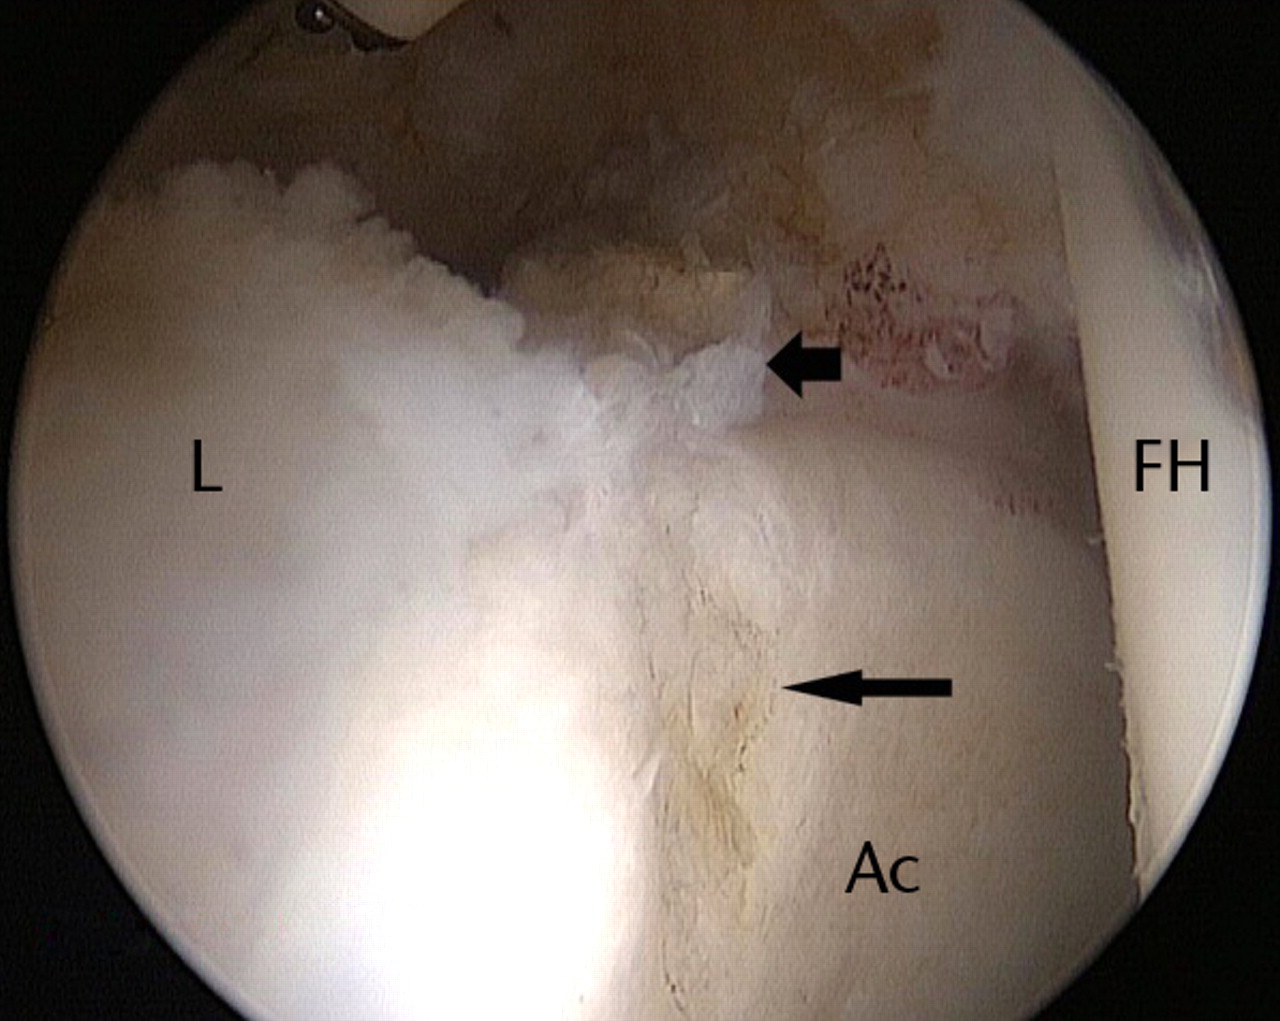 Figs. 8a - 8b 
          
            Figure 8a – arthroscopic image of
a successful labral repair with use of the vertical mattress technique
leaving the articular edge of the labrum free, with the suture barely
visible (arrow). Figure 8b – arthroscopic image after an unsuccessful
labral repair (cinch stitch technique) in which the suture cut through
the labrum, showing the final appearance of debridement of the anterosuperior
labrum (short arrow). Acetabular chondroplasty was also performed
in that case (long arrow) (L, labrum; FH, femoral head; Ac, acetabulum).
        